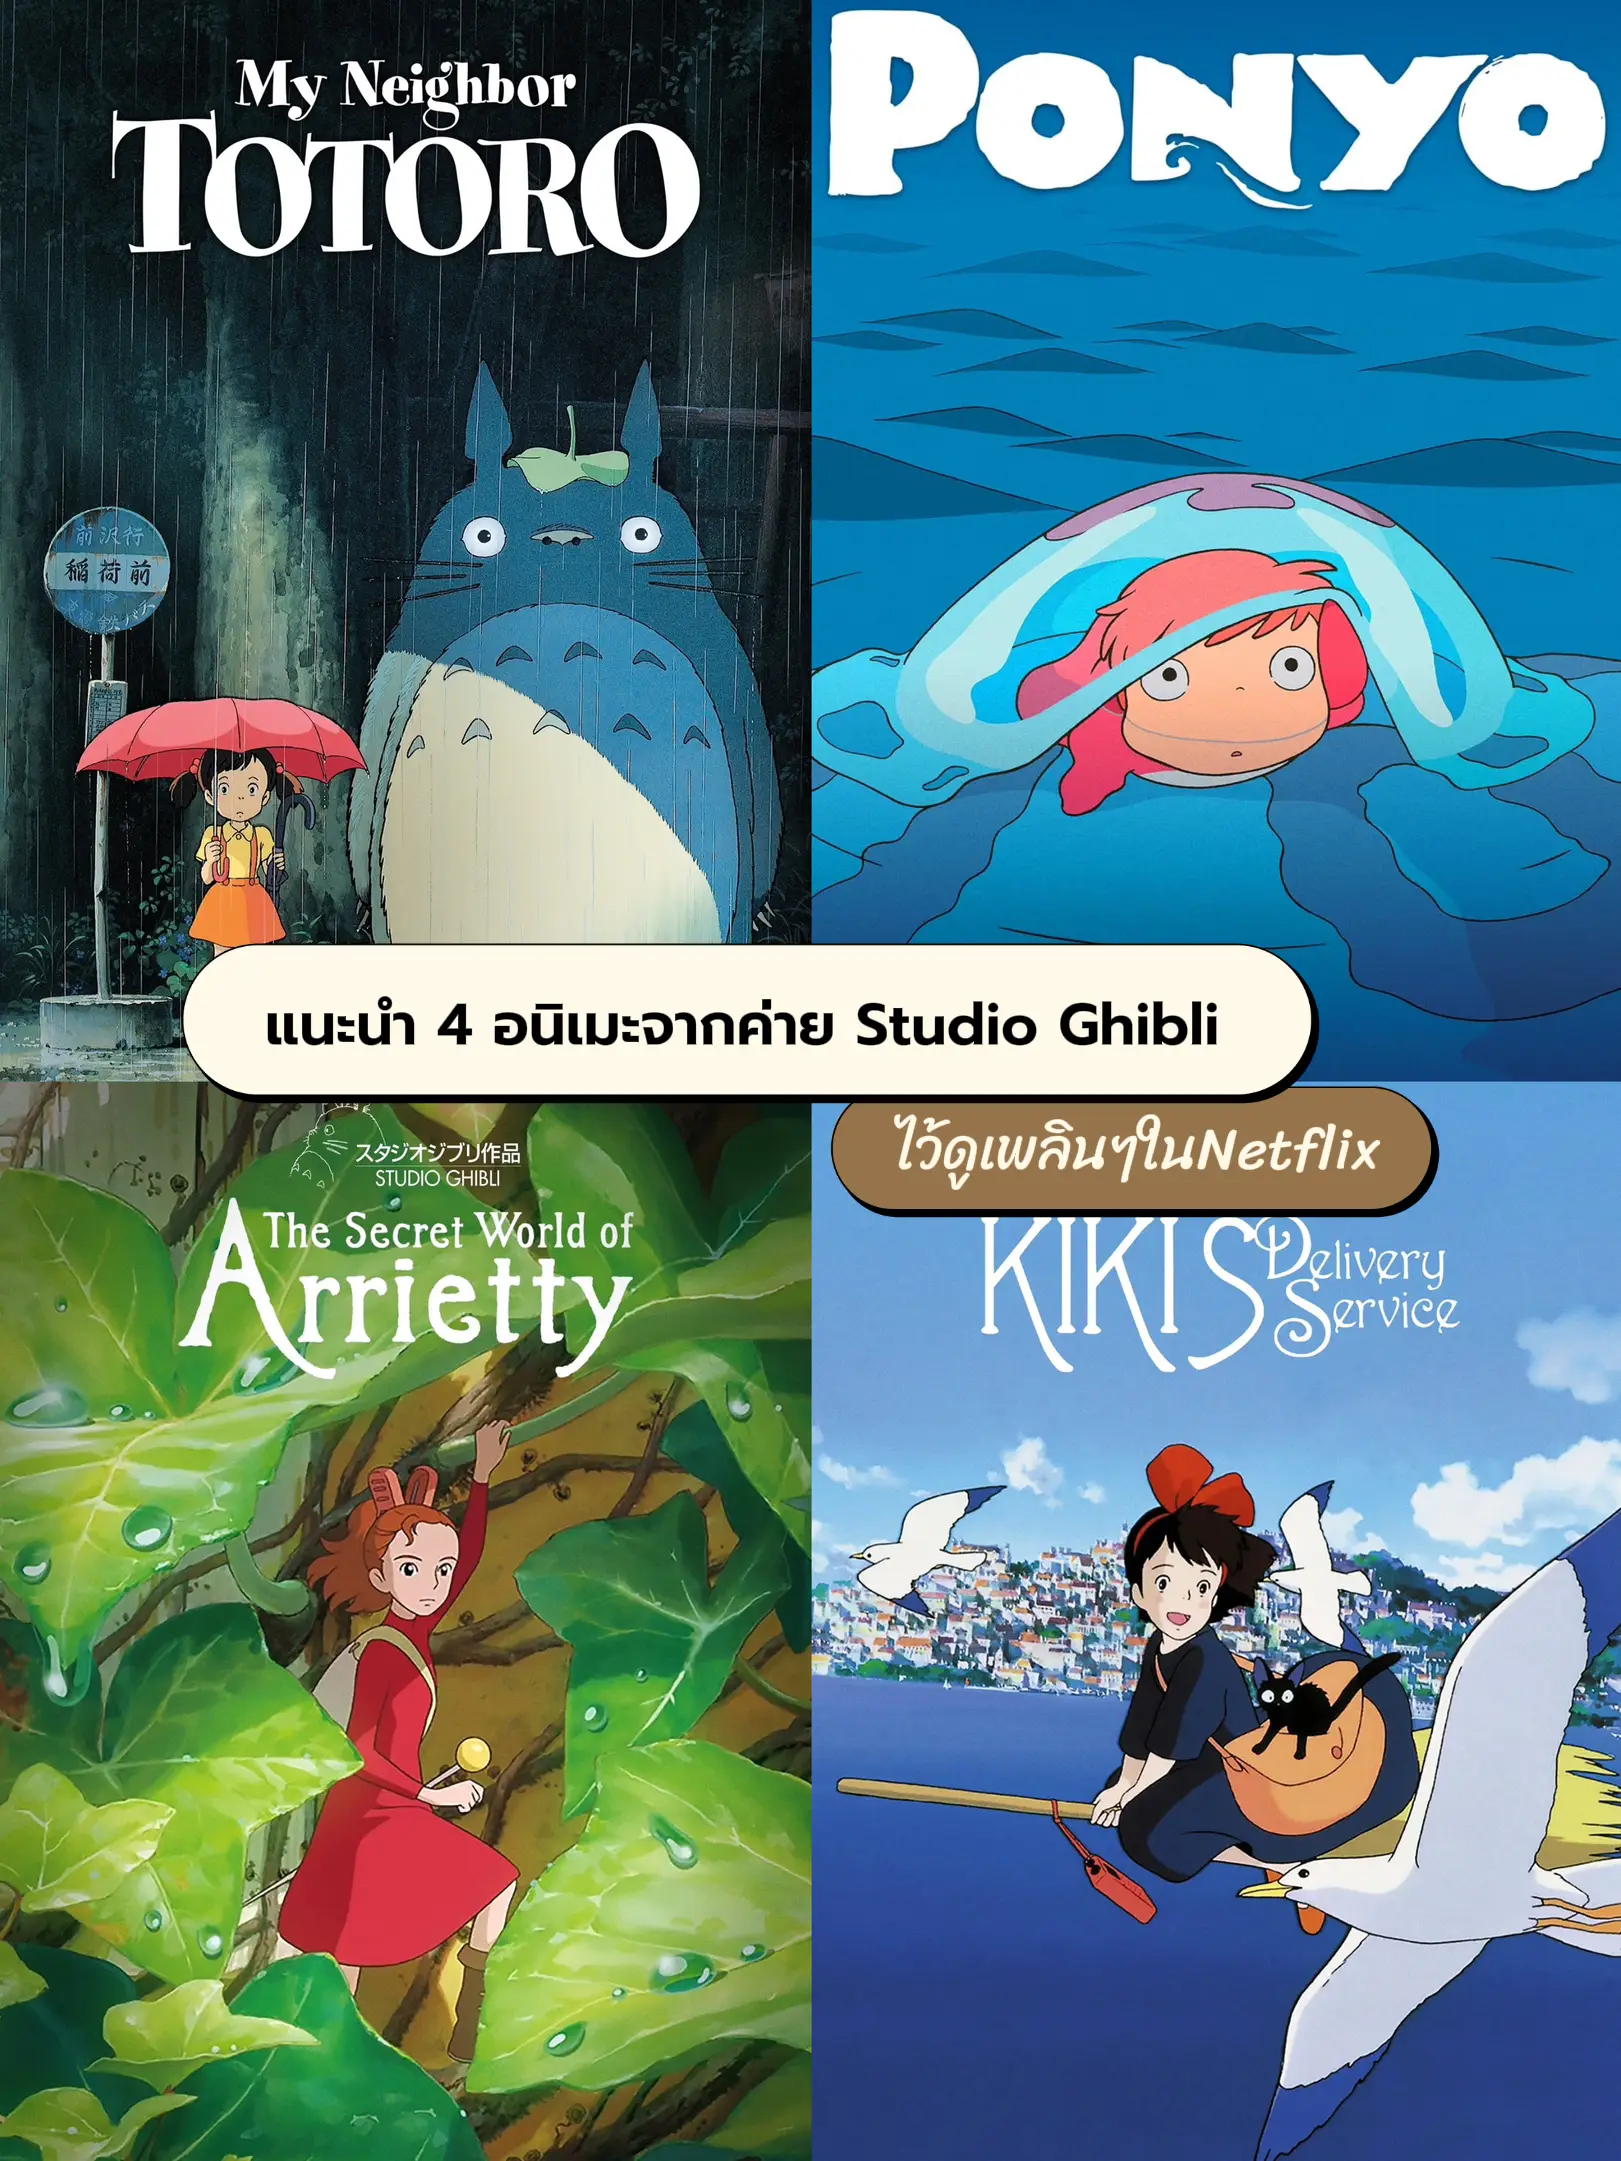 Introducing 4 Anime from Studio Ghibli Camp, Gallery posted by NJishappy